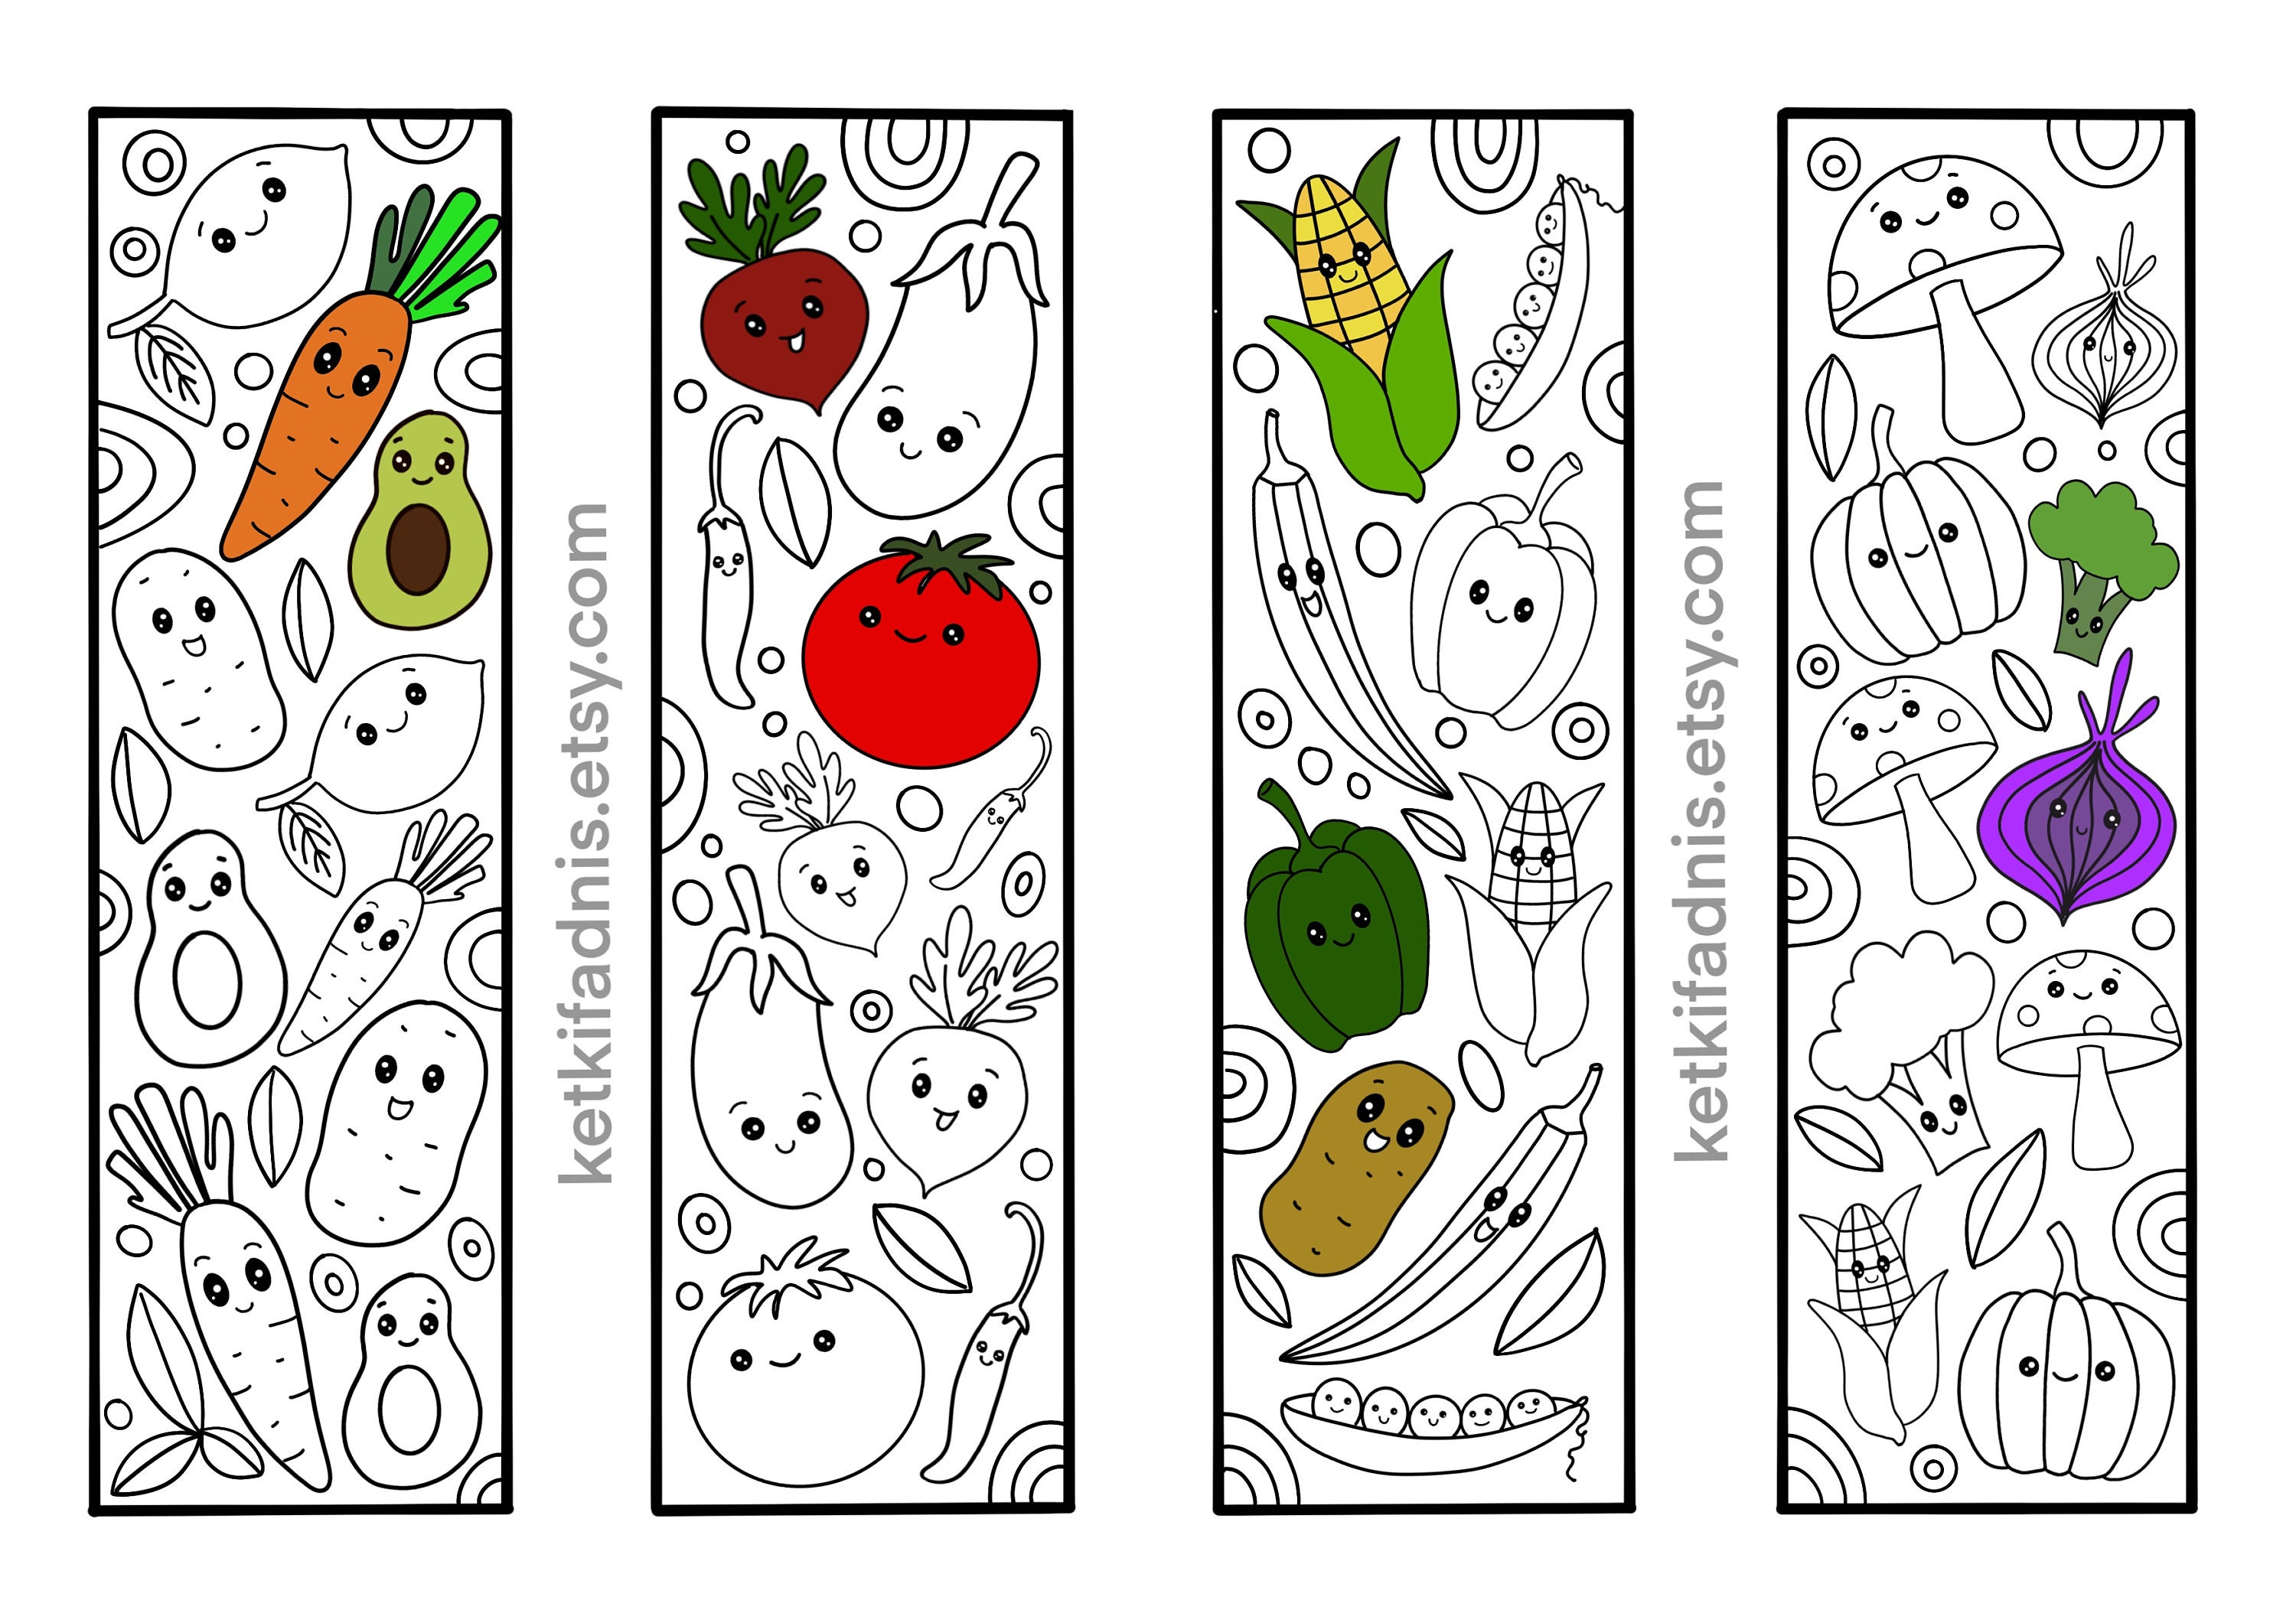 Kawaii Vegetables Coloring bookmarks bookmarks coloring page | Etsy